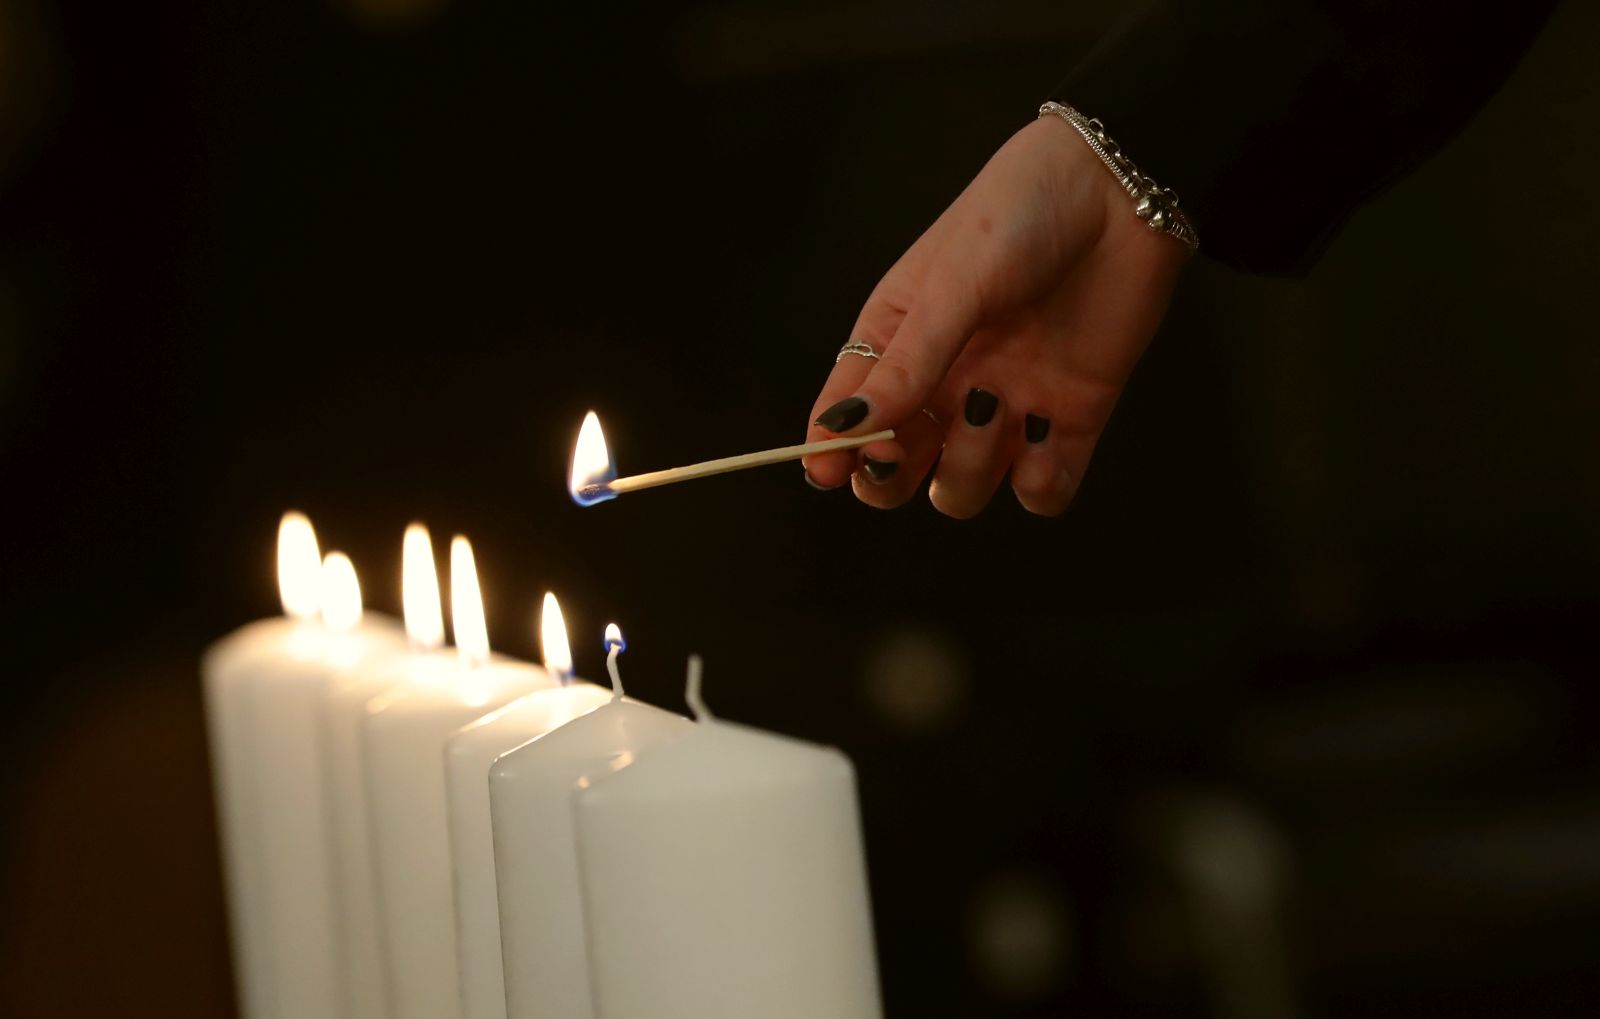 epa10578896 A person lights a candle during a special memorial service for victims of the Holocaust during the celebration of Yom HaShoah, the Israeli Holocaust Remembrance Day, at the Jewish Community Center in Bucharest, Romania, 18 April 2023. The Holocaust Remembrance Day 2023 began in the morning of 17 April and will end in the evening of 18 April, corresponding to the 27th day of Nisan on the Hebrew calendar, also marking the anniversary of the Warsaw Ghetto Uprising during World War II.  EPA/ROBERT GHEMENT